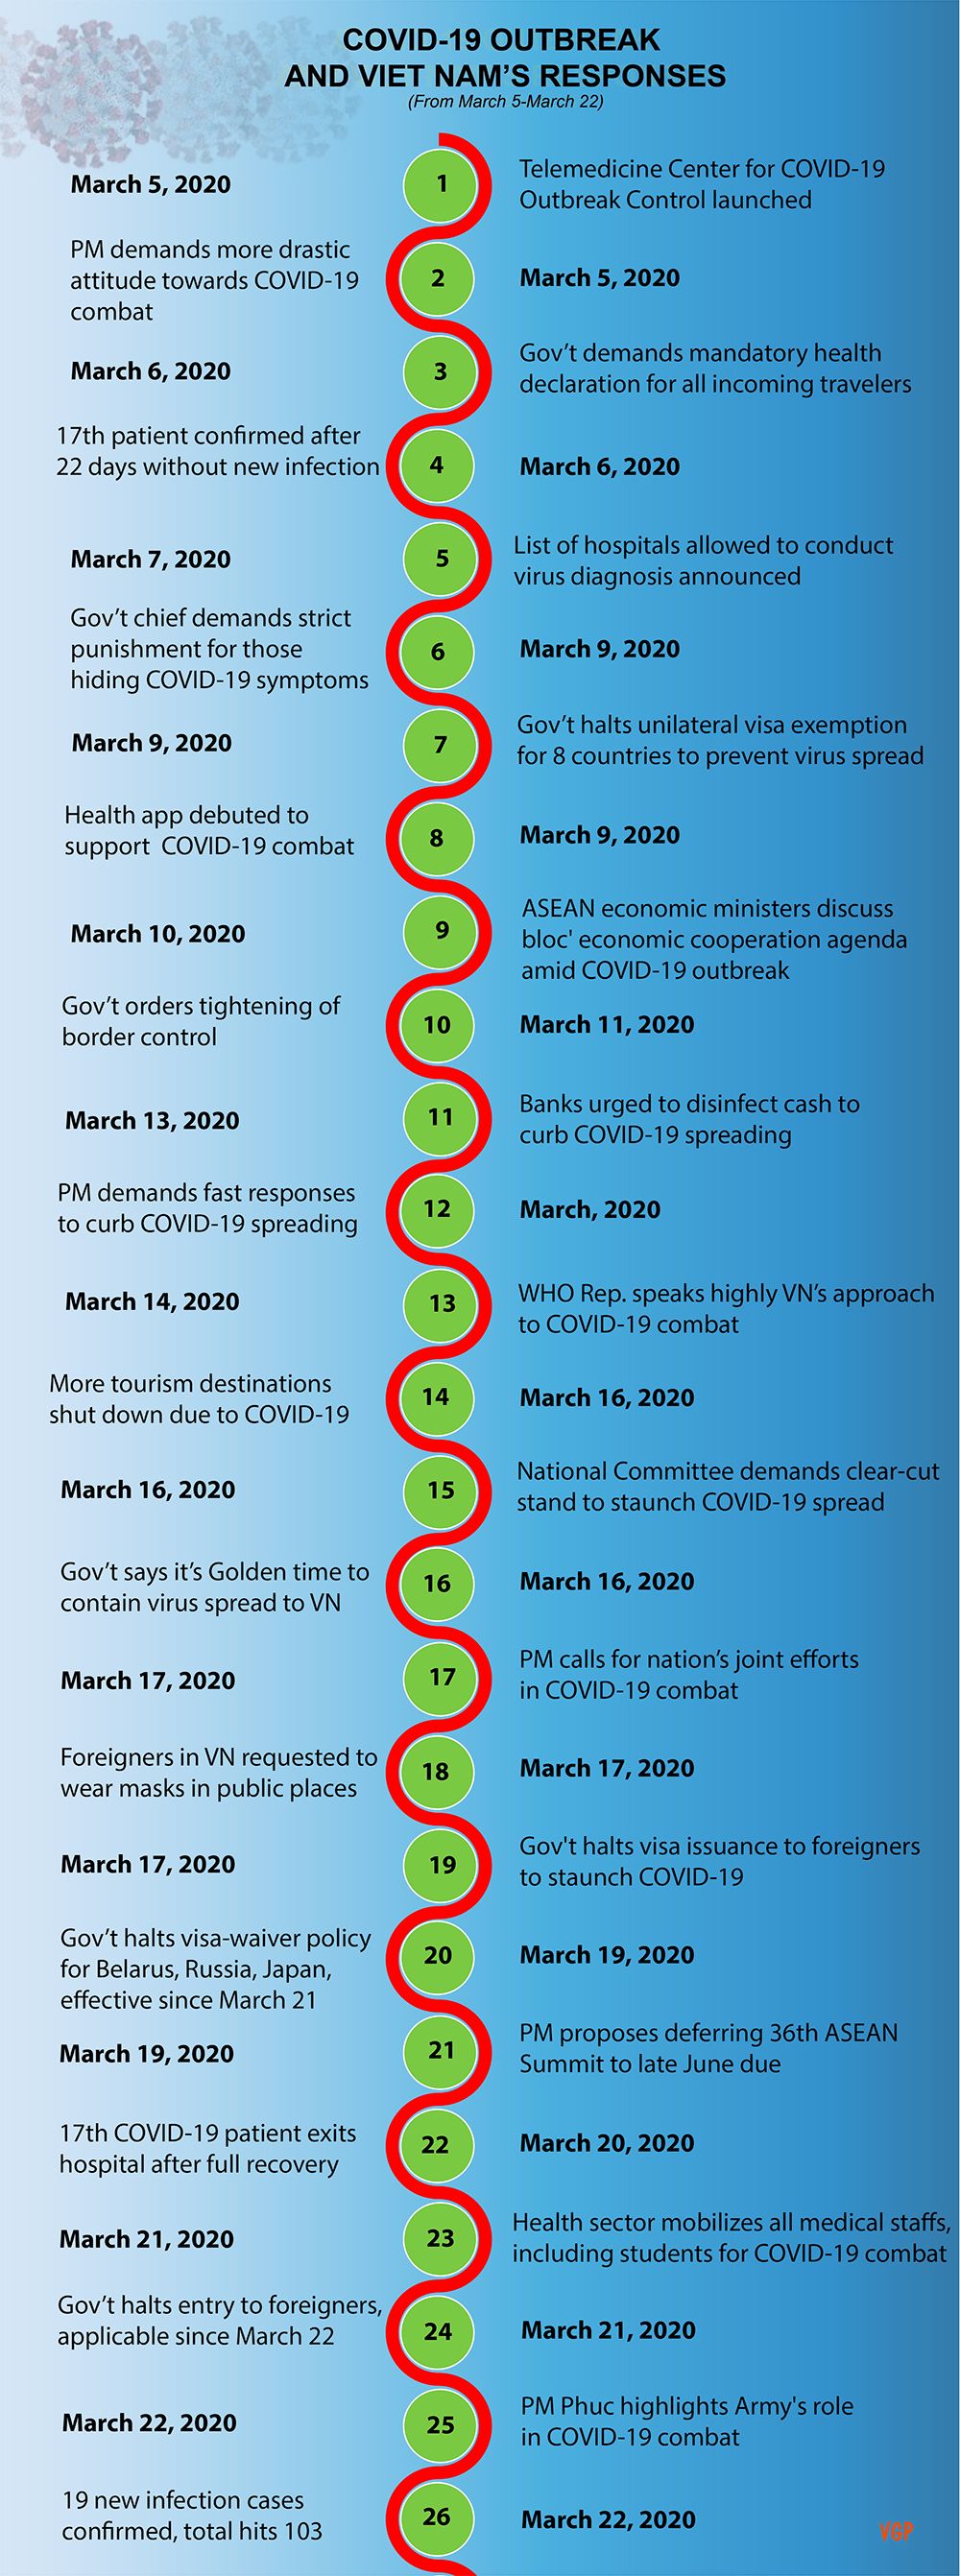 infographic brief summary of govt responses to covid 19 pandemic in the past three weeks